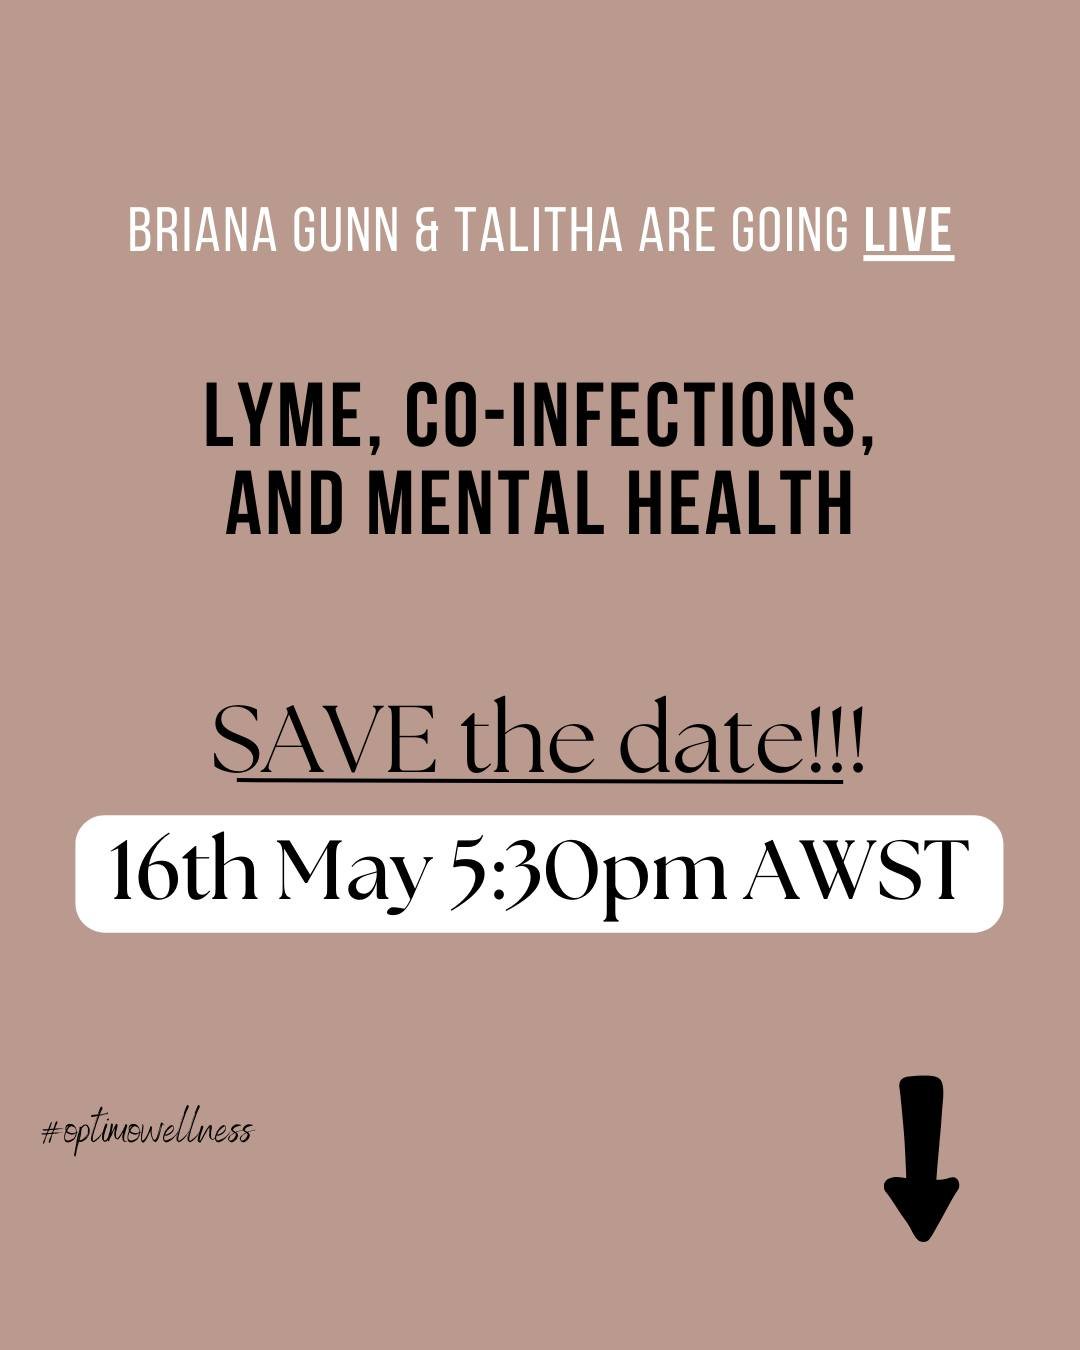 🙌 ANNOUNCEMENT 🙌

Ever wondered if you have a tick-borne illness? Or perhaps you're wondering what red flags to look for in your clients?

SAVE THE DATE
➡ 16th May 5:30pm AWST
Join @brianagunn_naturopathy and I on (LIVE on instagram) as we delve in